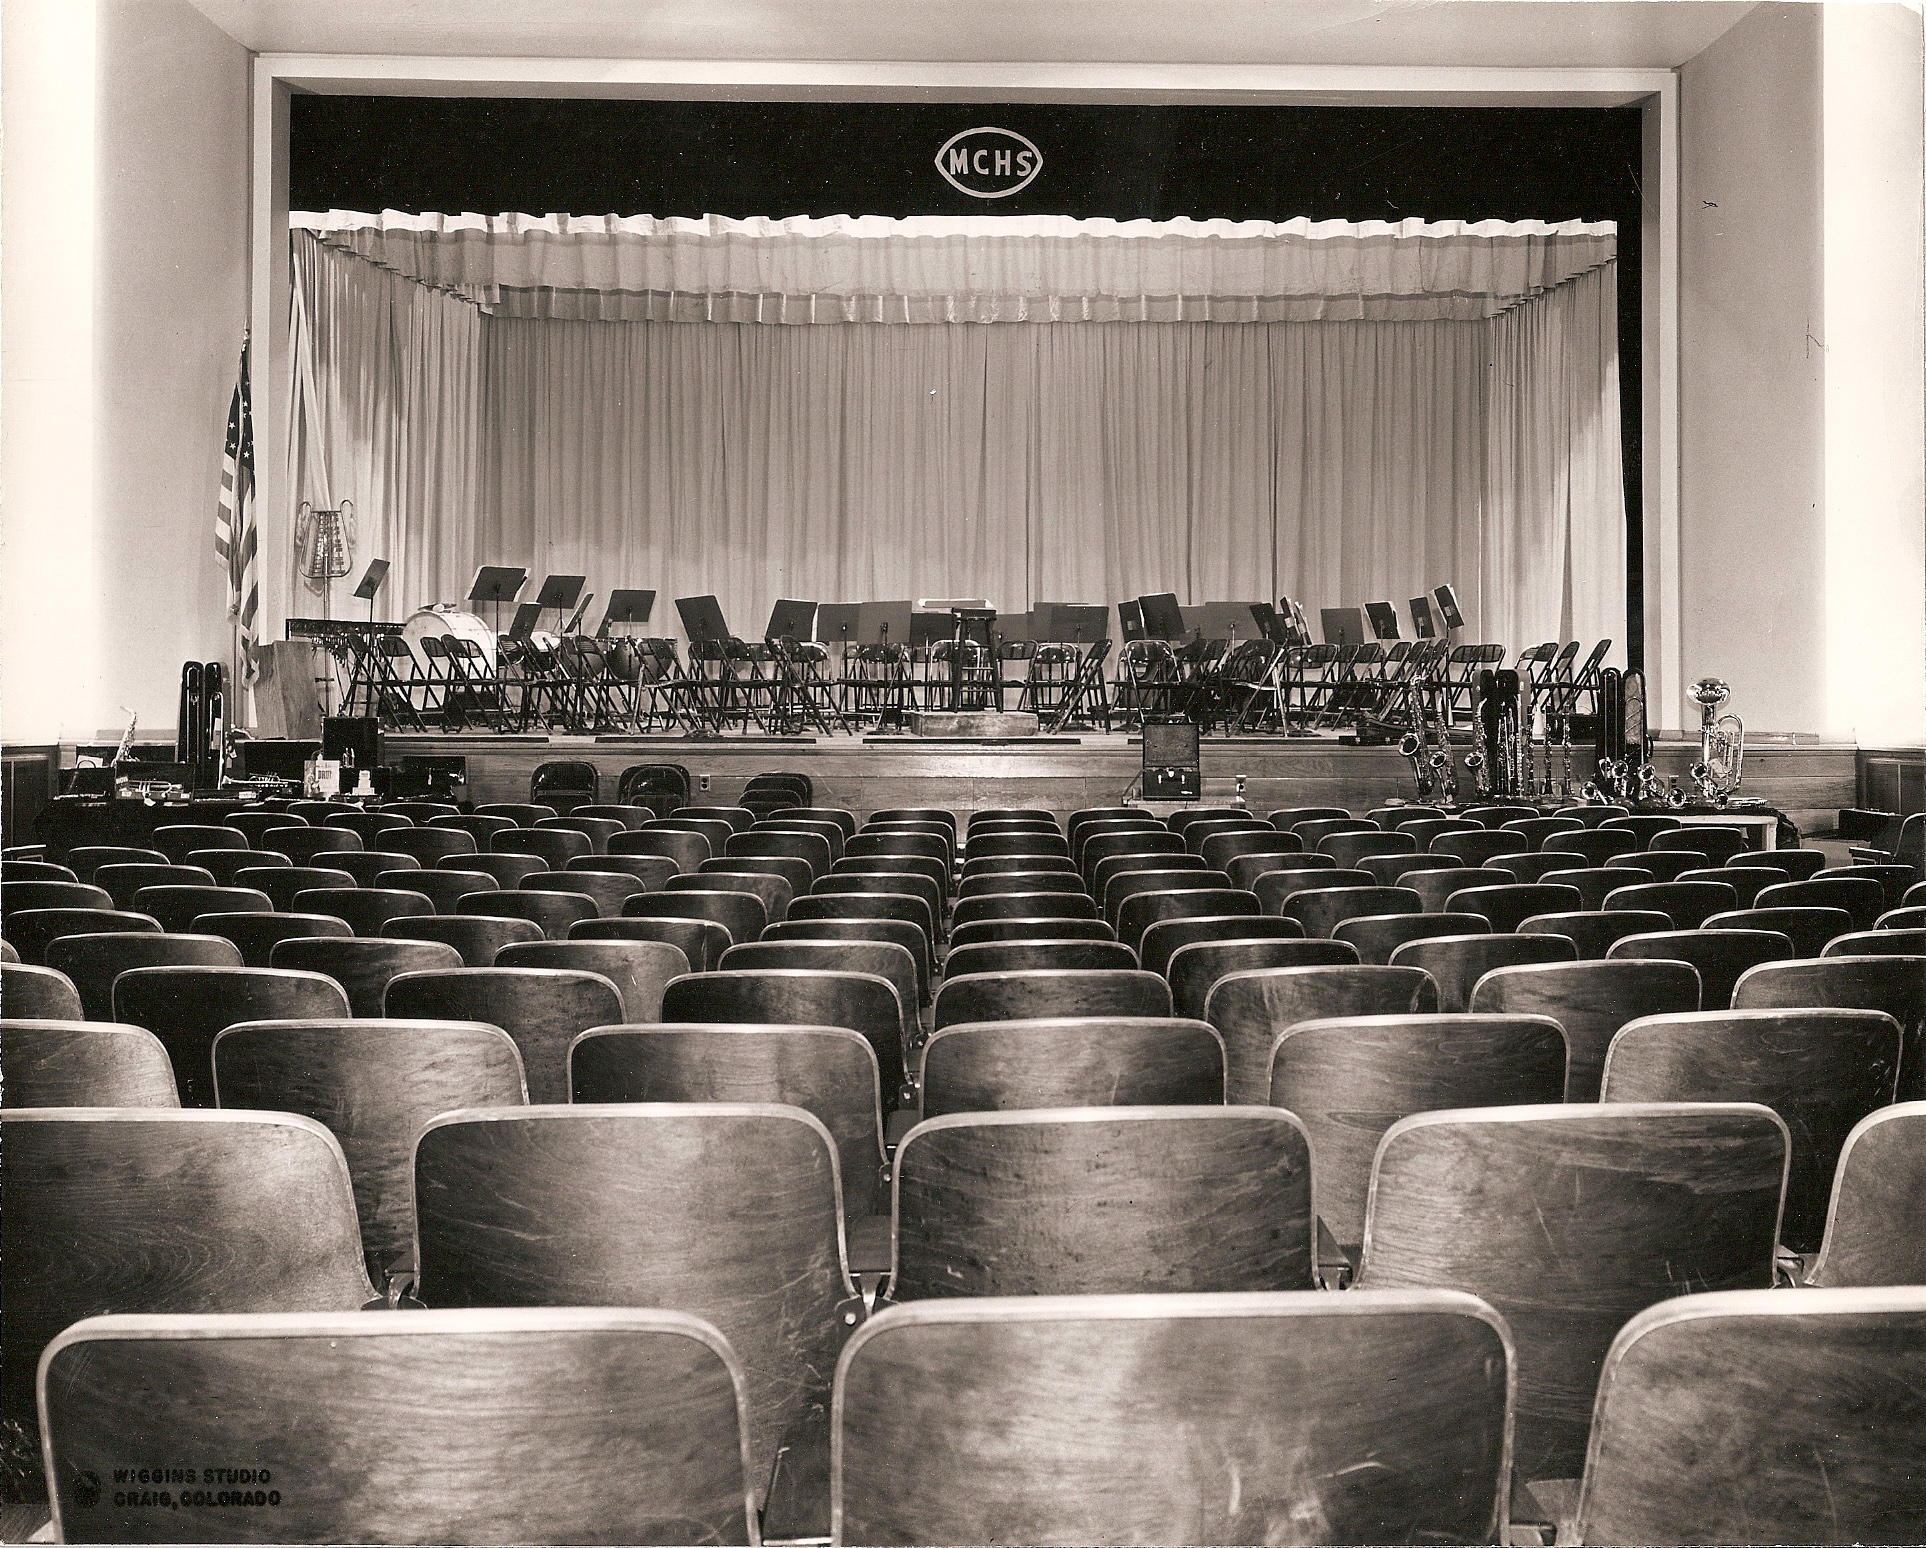 Looking inside the auditorium.  Where's Charlie Brown?  Photo provided by the Museum of Northwest Colorado.  Thanks